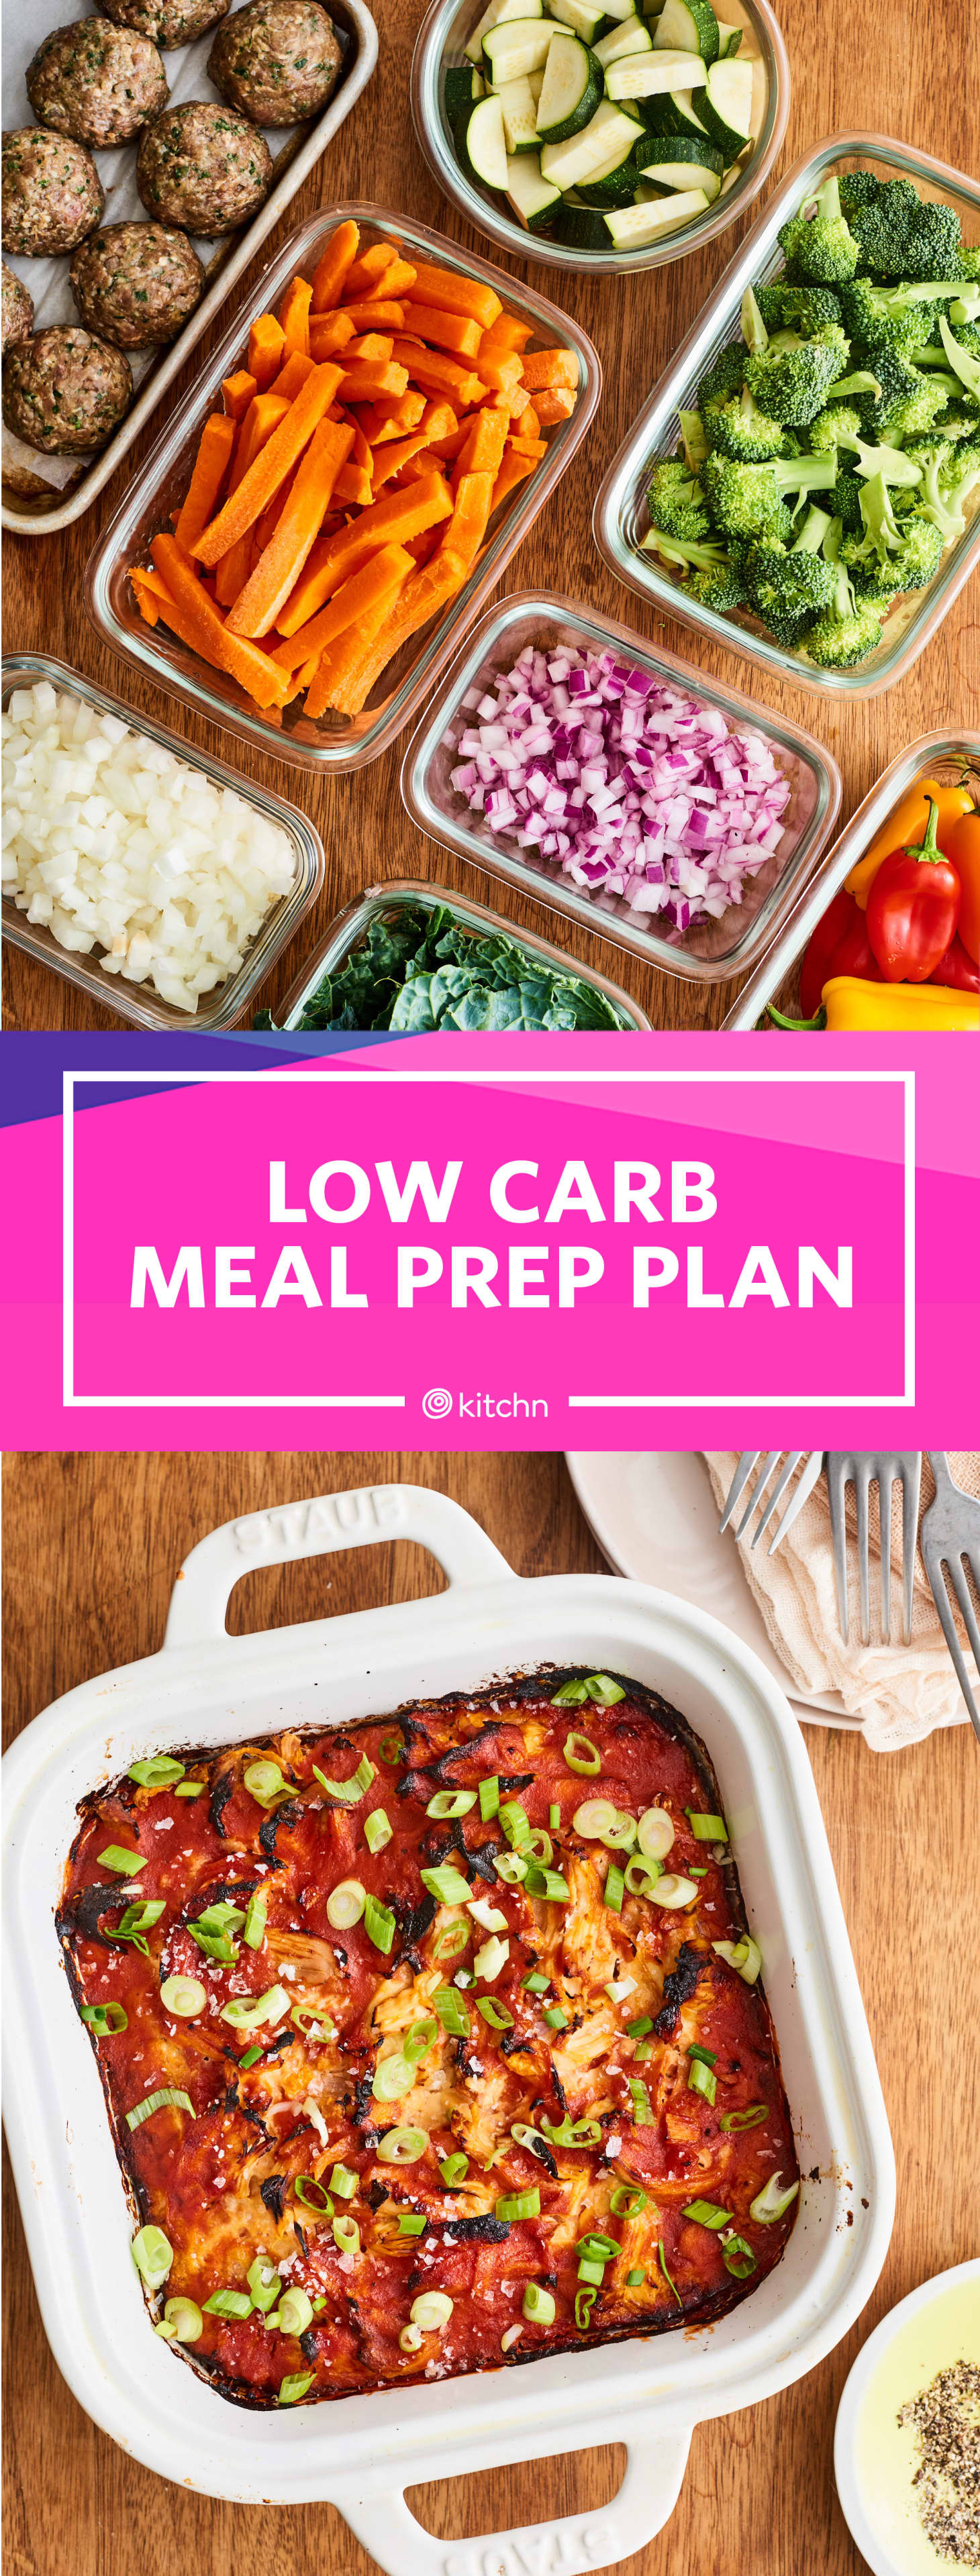 Fast Low Carb Meal Prep In Under 2 Hours Kitchn 